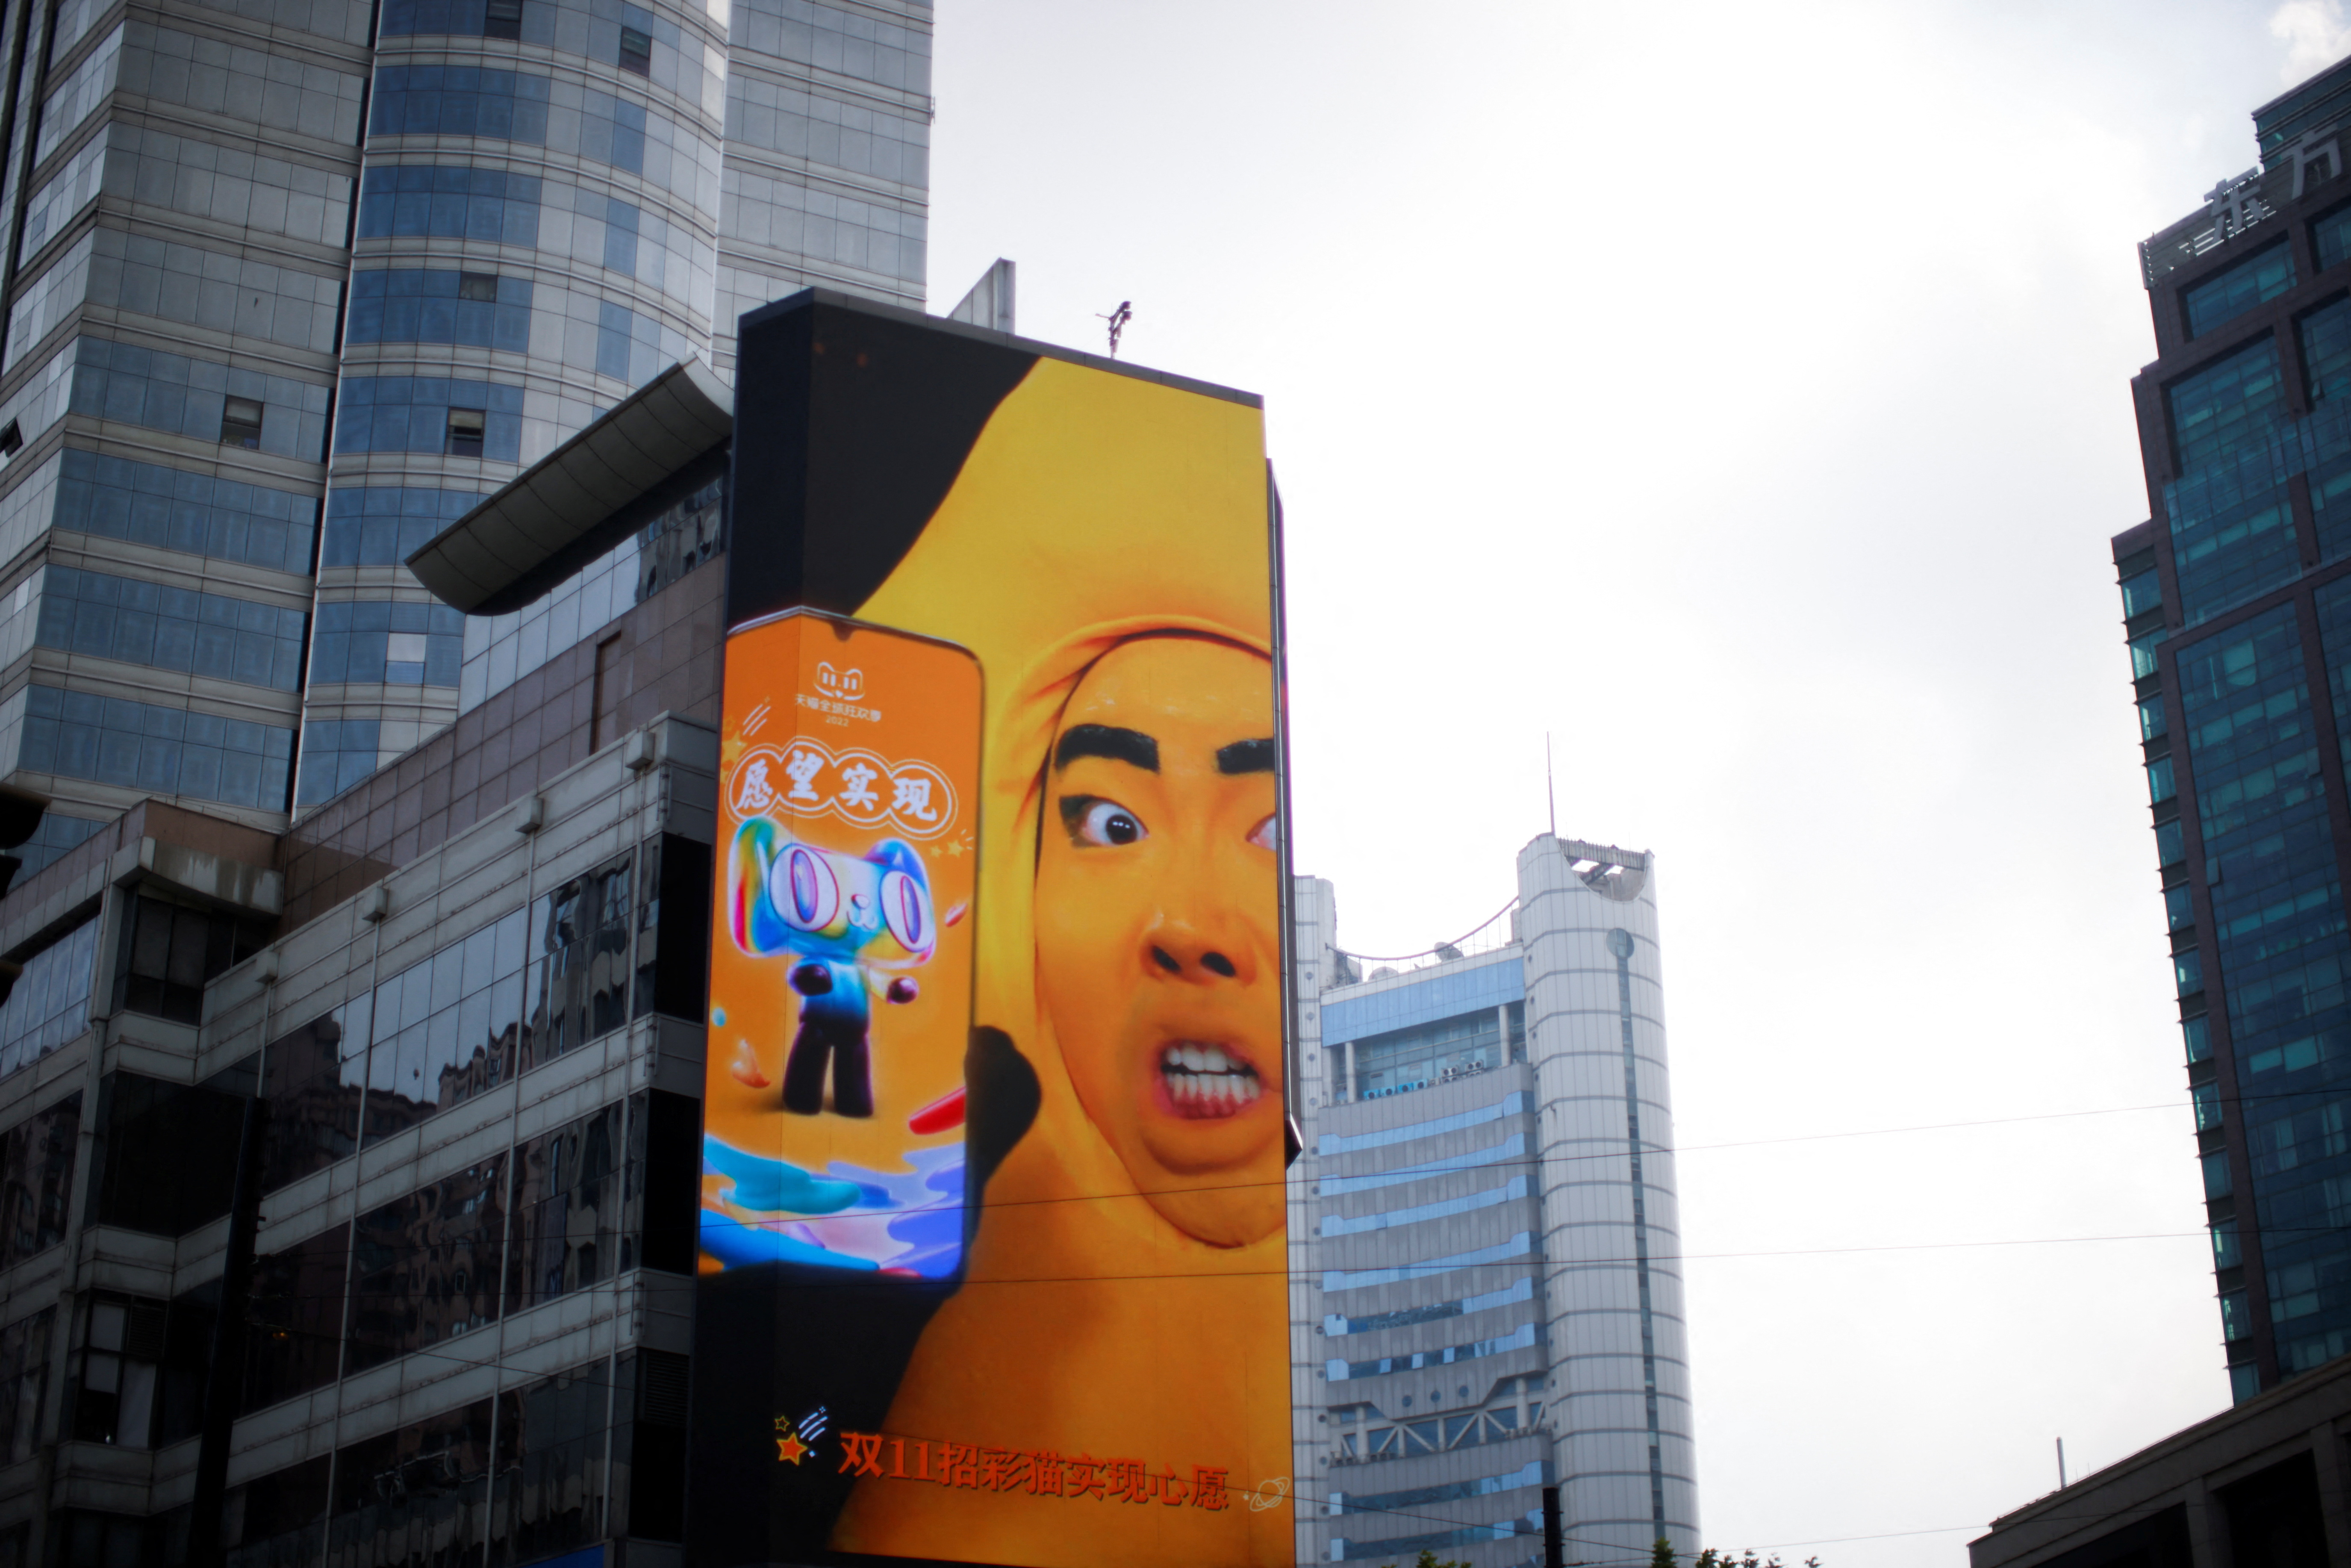 An advertisement promoting Alibaba's Singles' Day shopping festival is pictured in Shanghai